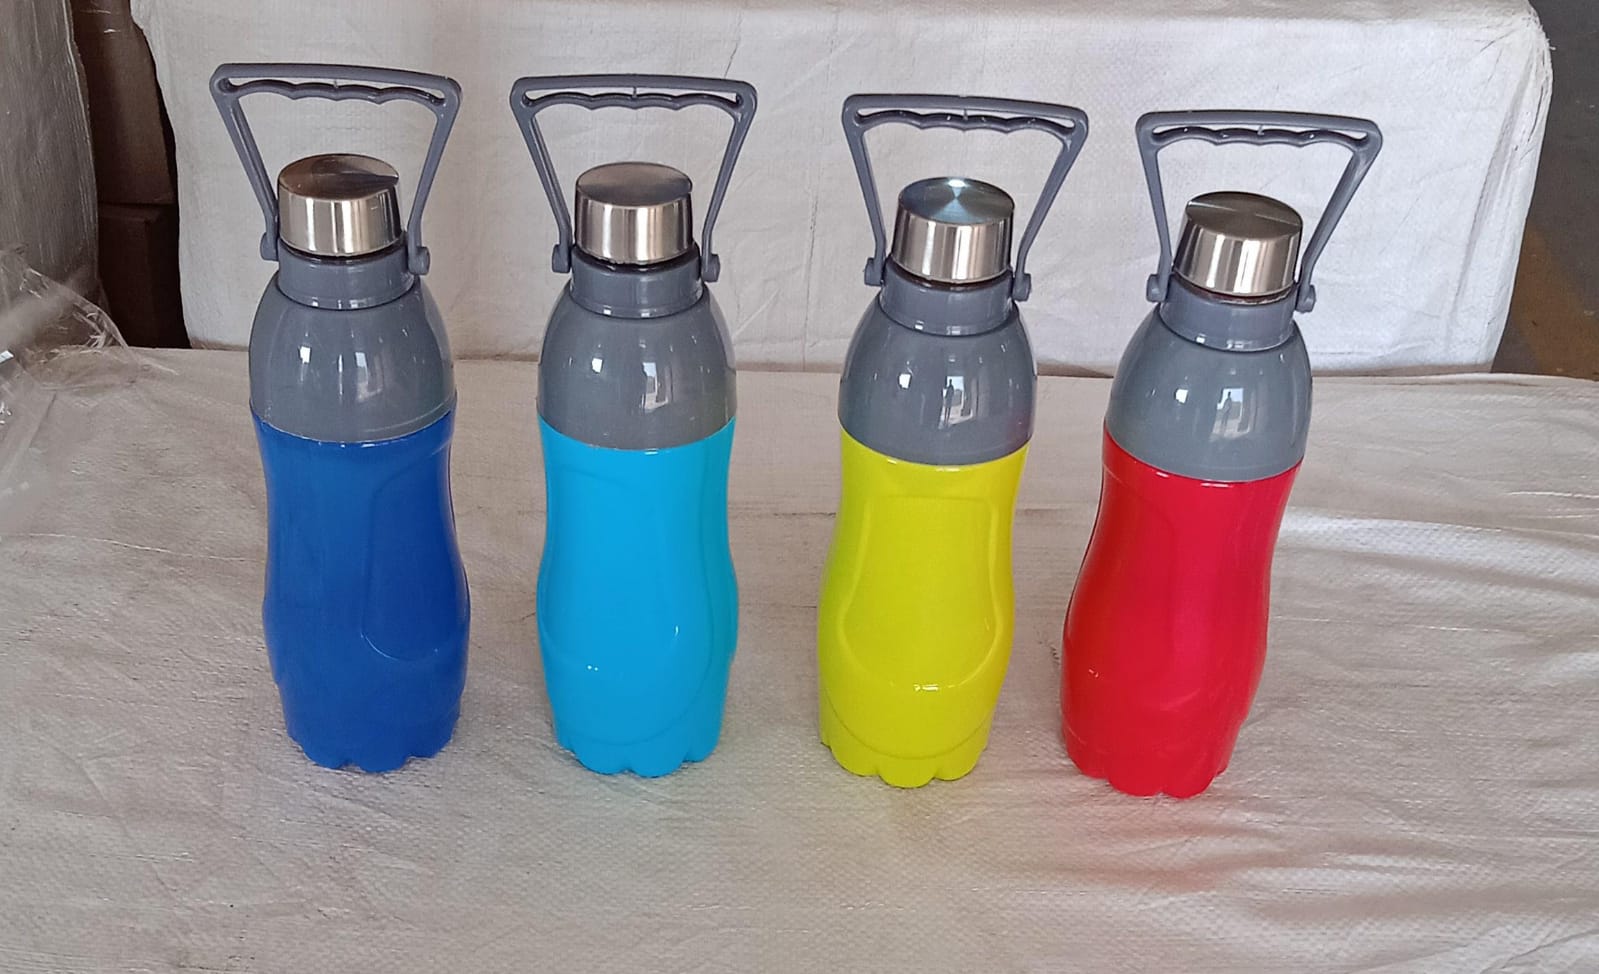 6277 Plastic Sports Insulated Water Bottle with Handle Easy to Carry High Quality Water Bottle, BPA-Free & Leak-Proof! for Kids' School, For Fridge, Office, Sports, School, Gym, Yoga (1 Pc Mix Color)